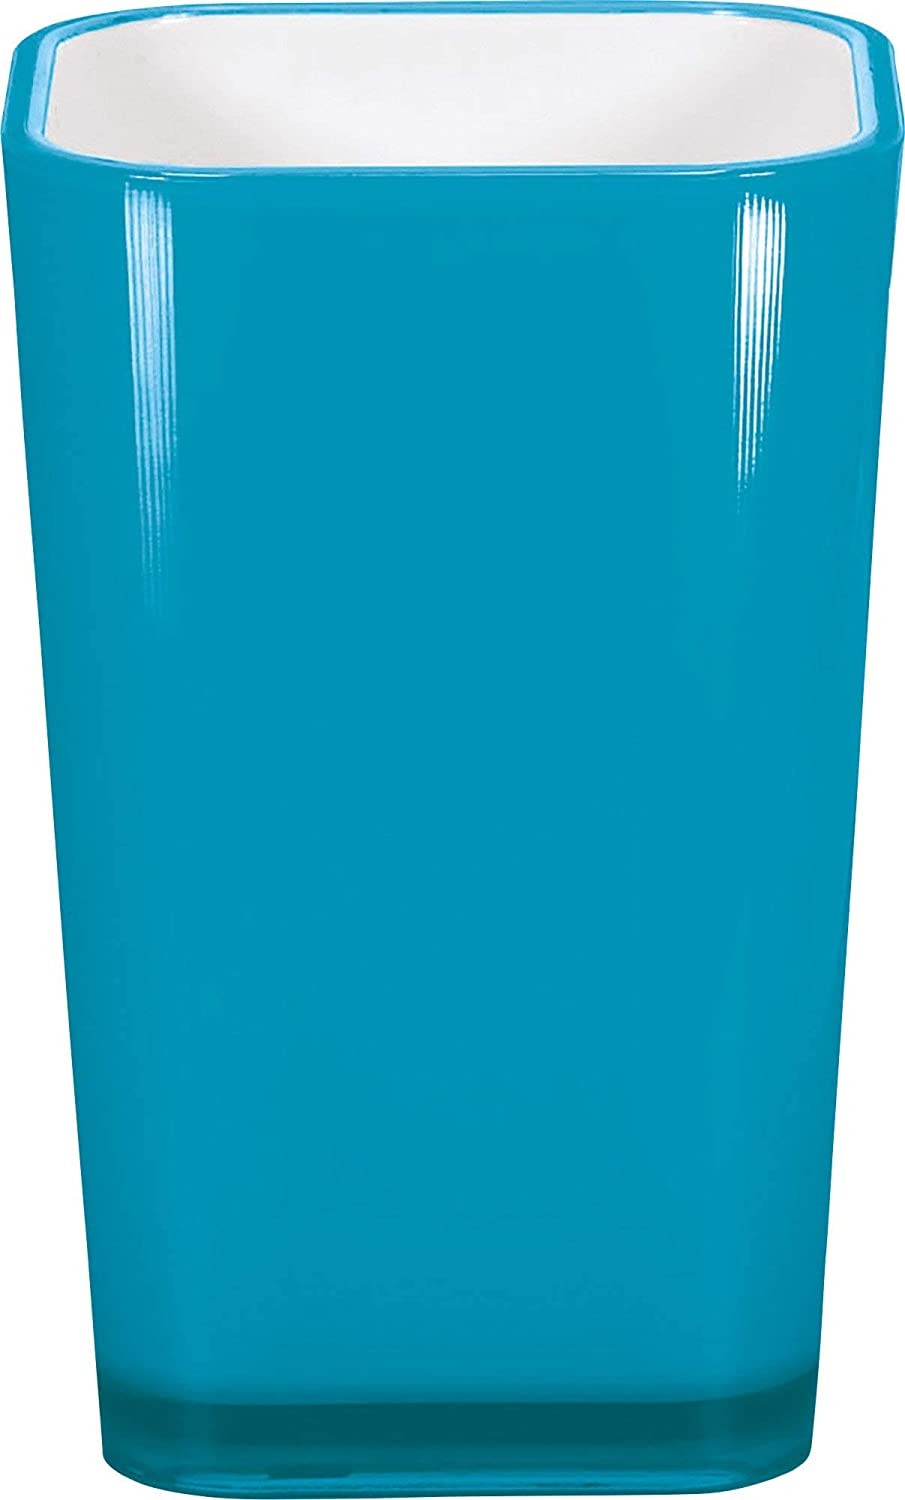 Kleine Wolke Easy Tooth Brush Holder Turquoise - Home & Beyond